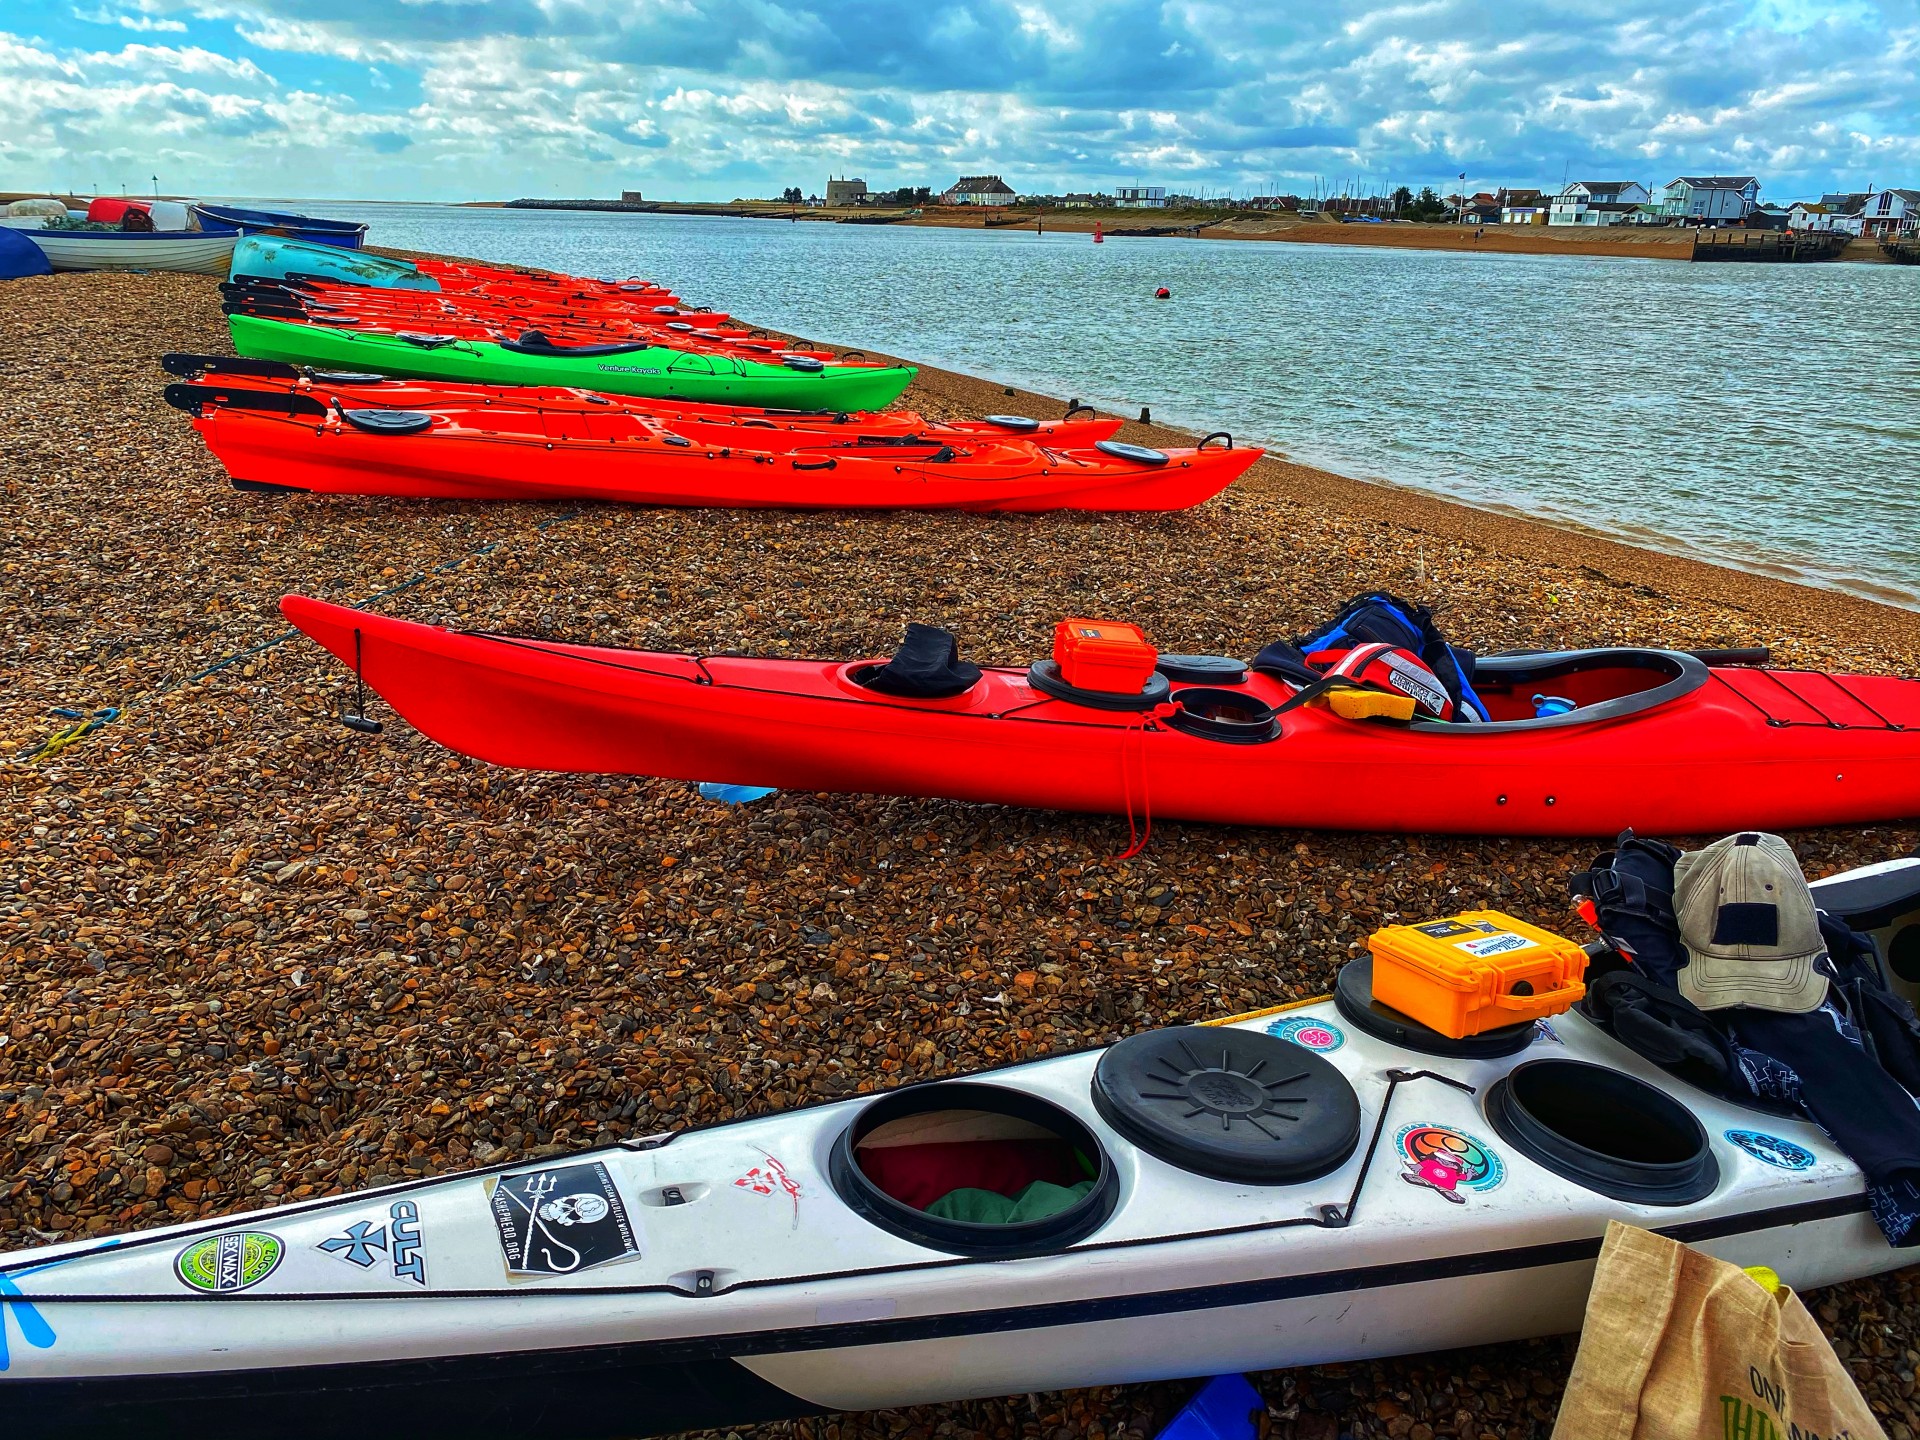 NDK Sport in Red with black decklines with an NDK Explorer Sea Kayak in the foreground